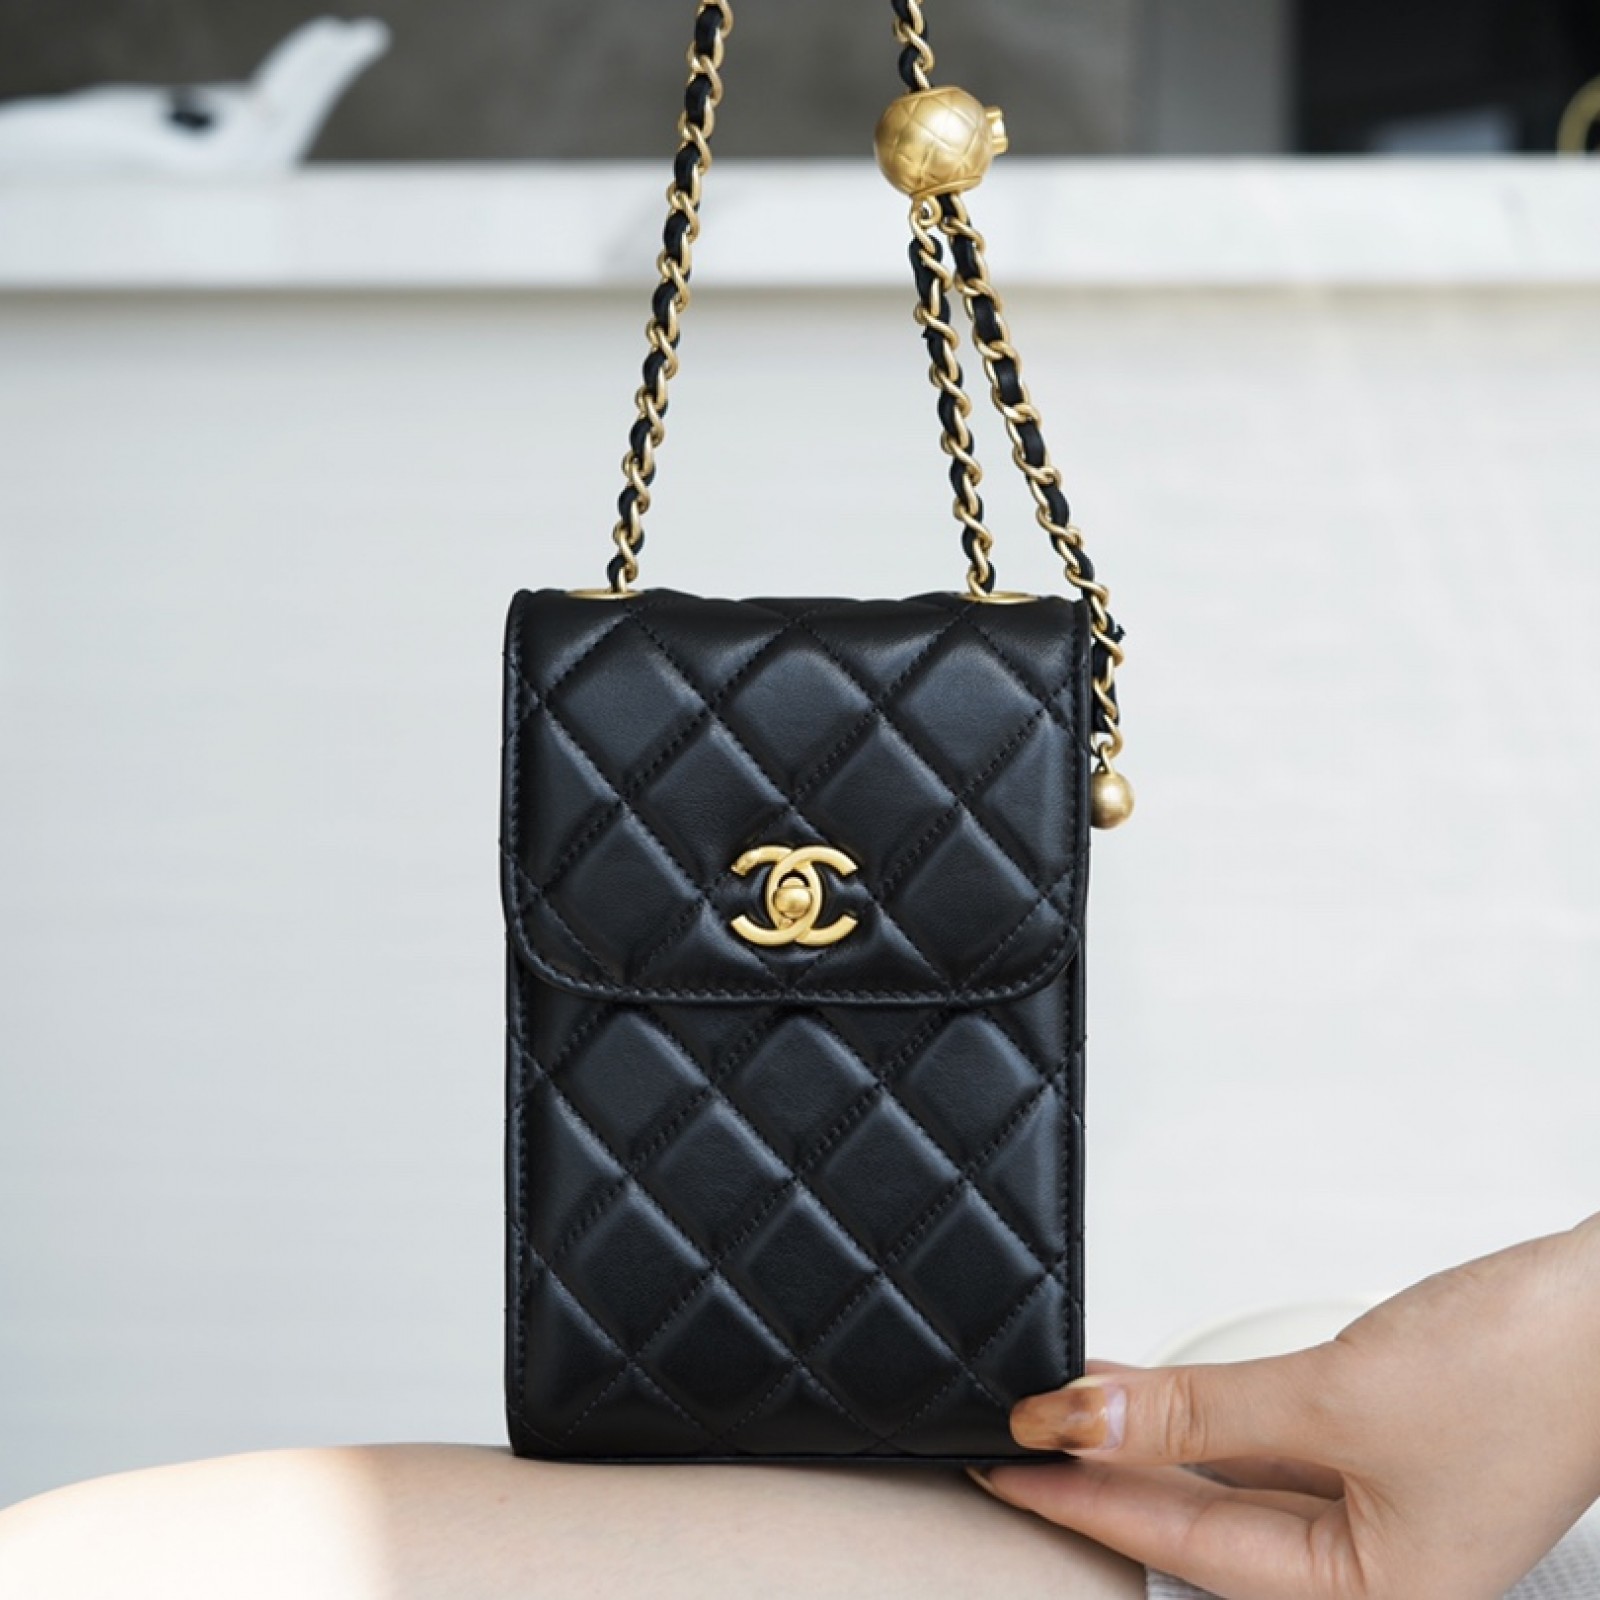 CHANEL PEARL CRUSH PHONE HOLDER WITH CHAIN BAG